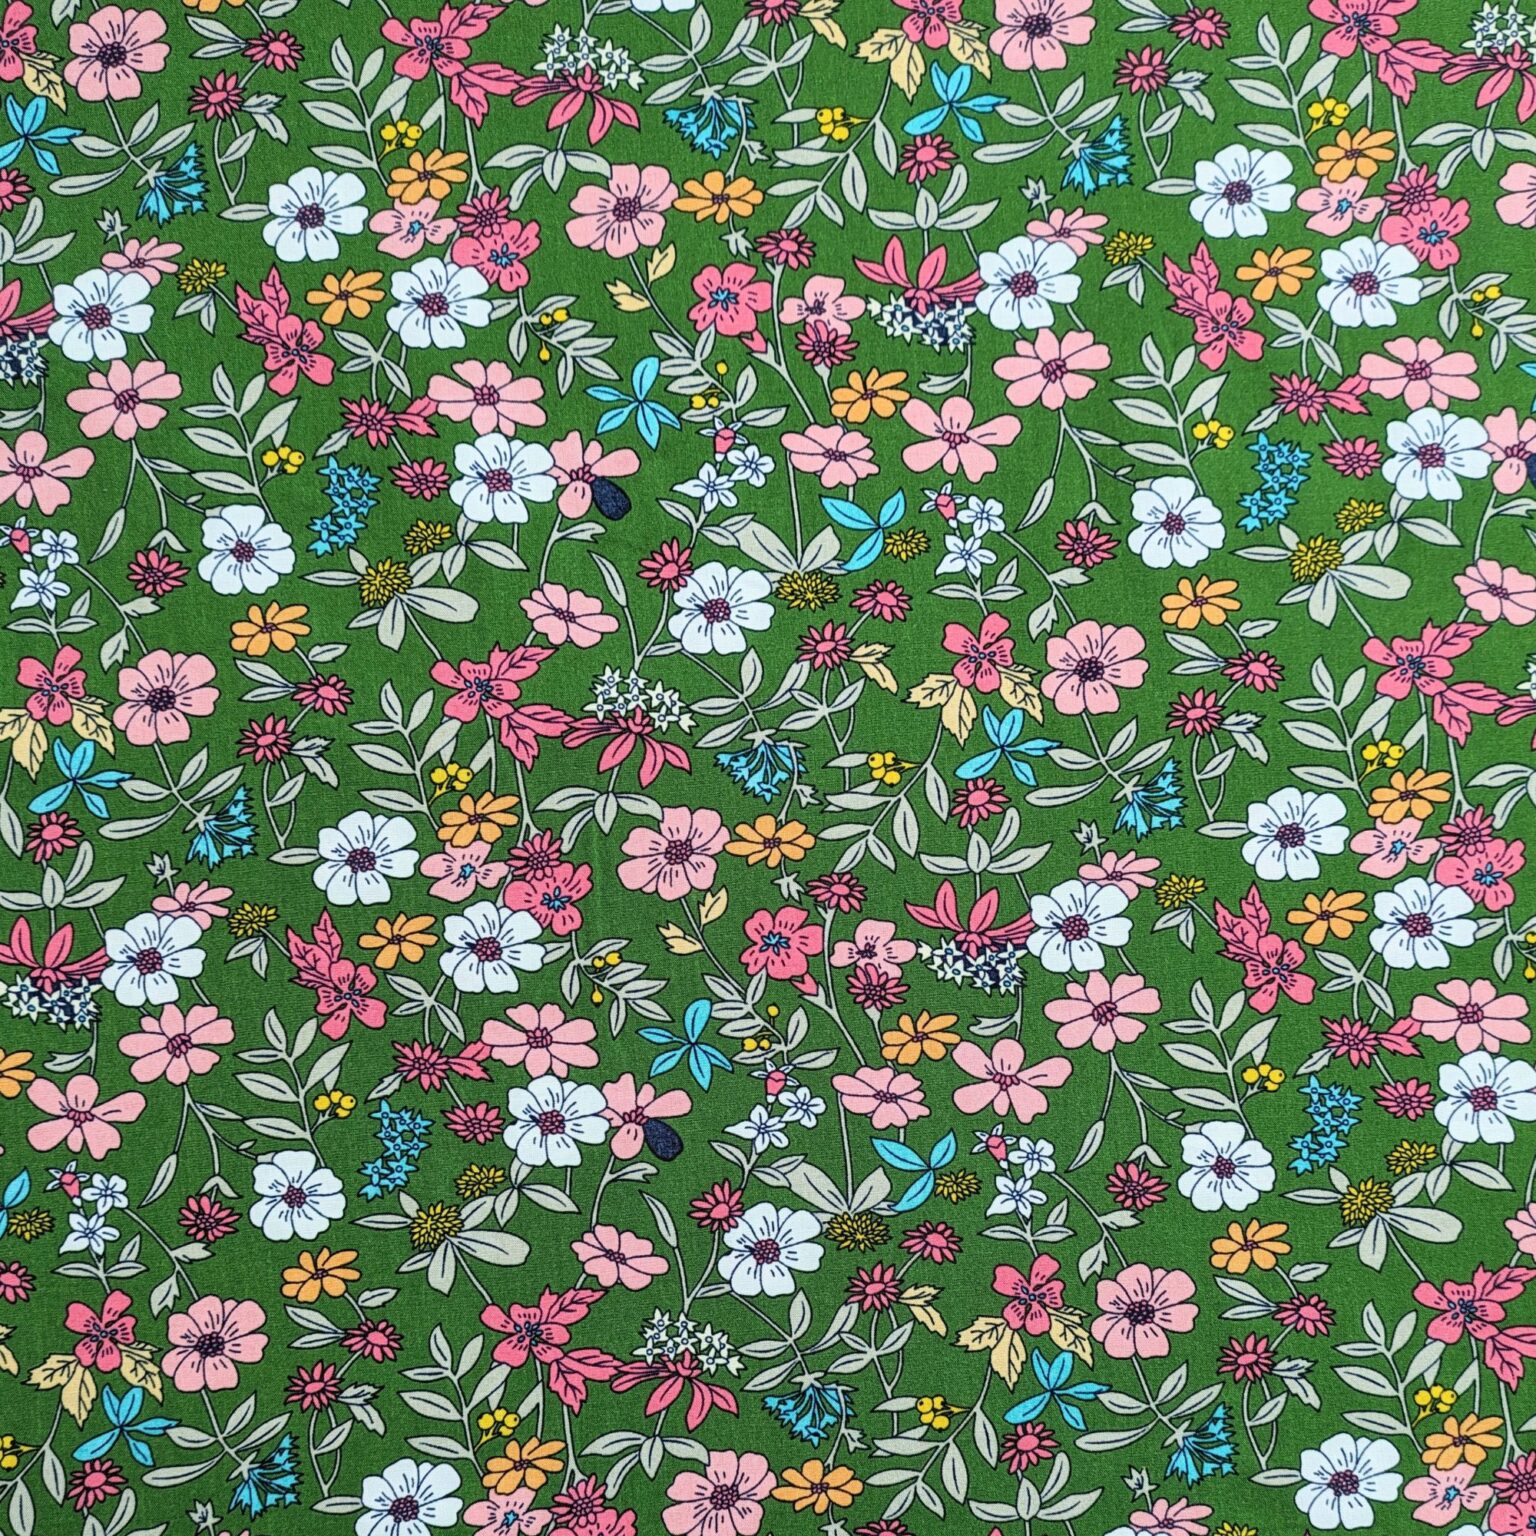 Viscose Fabric - Retro Penelope Floral - 140cm Wide | More Sewing